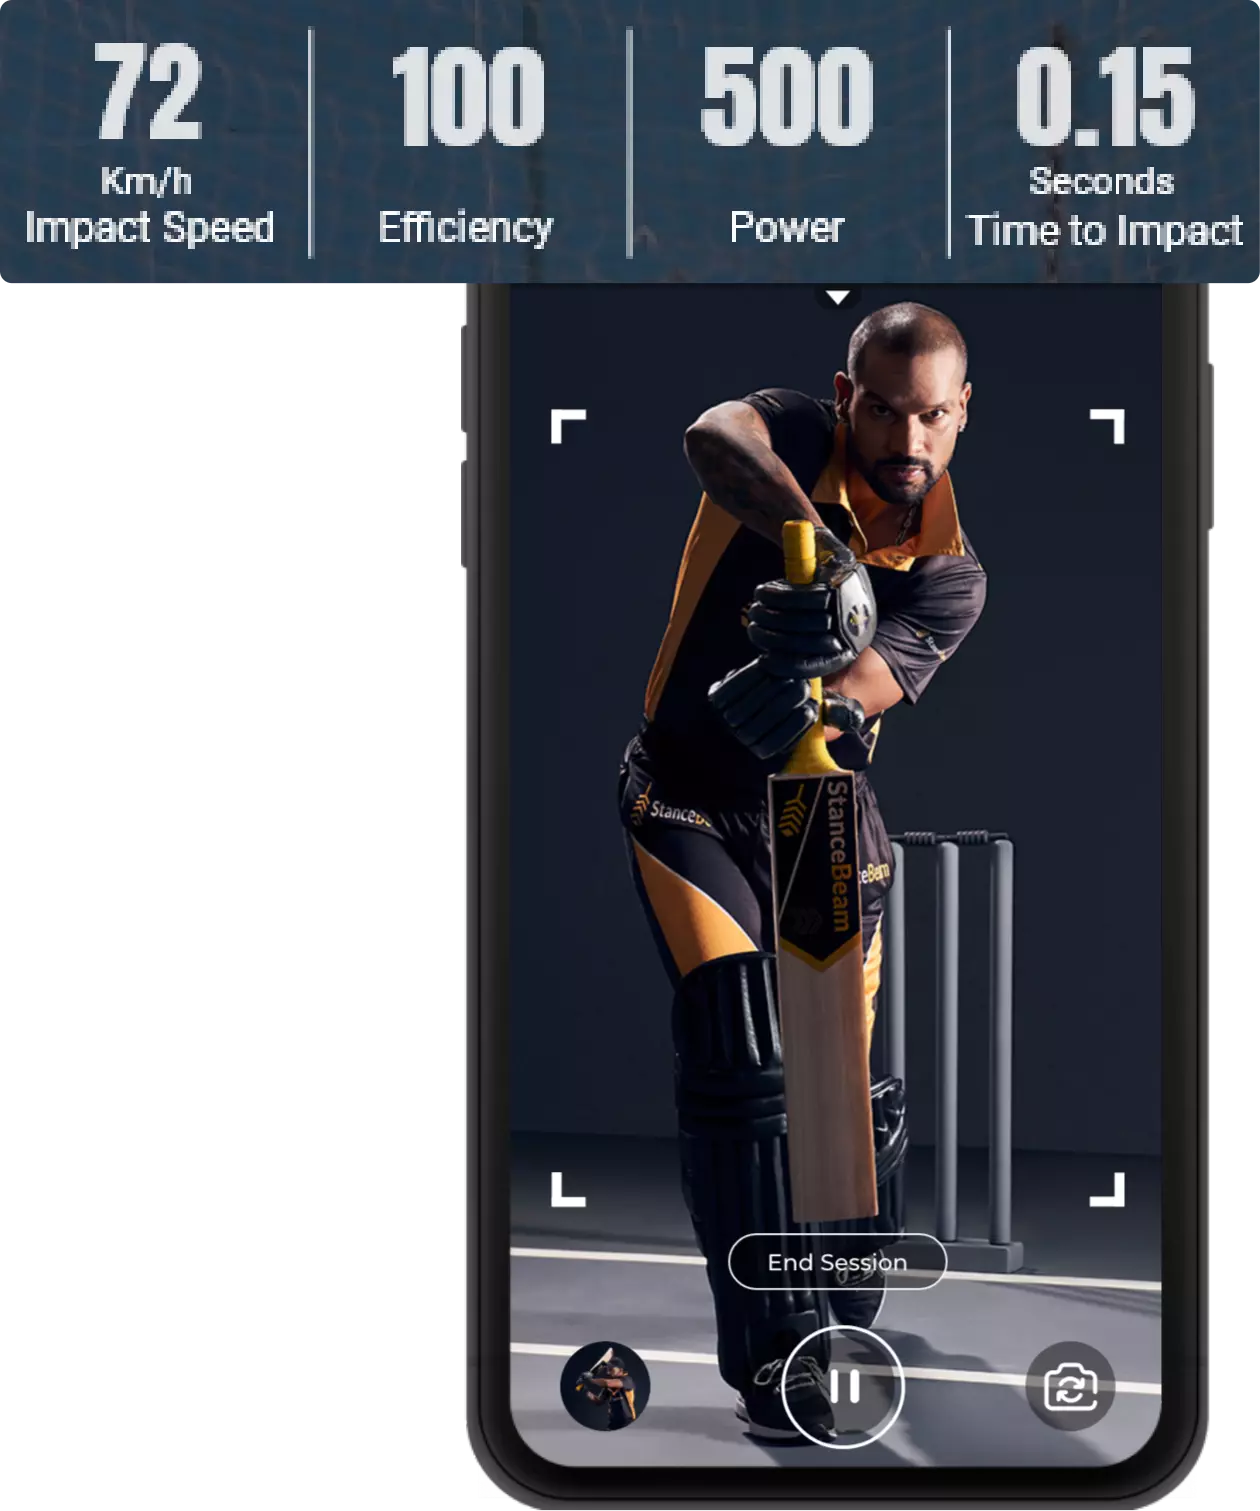 Track Bat Speed, Power, Back-lift, Downswing and Follow-Through Angle in StanceBeam App